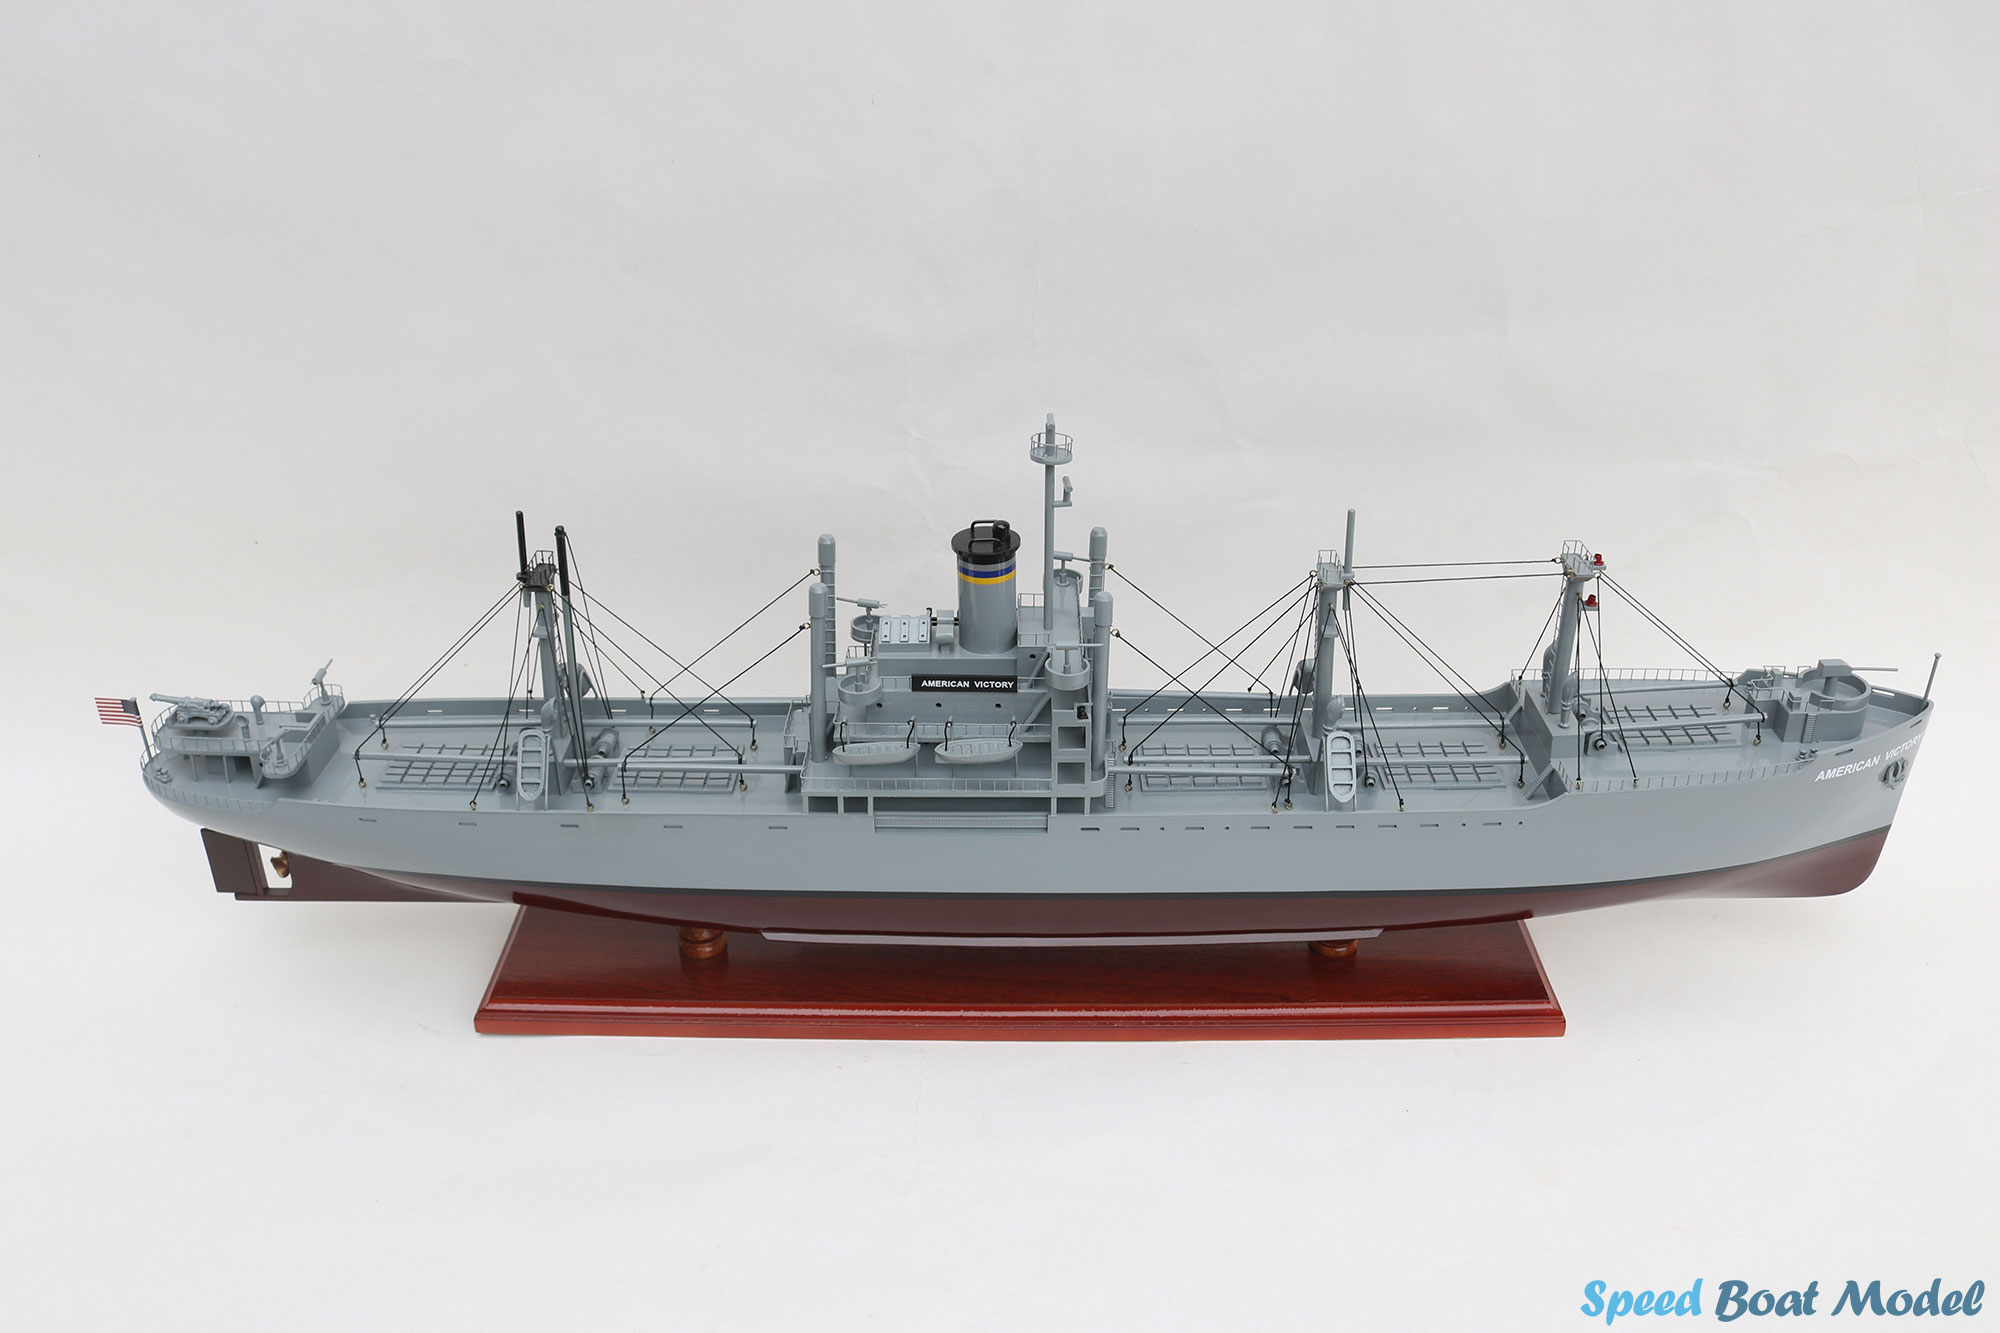 SS American Victory Commercial Ship Model 35.4"